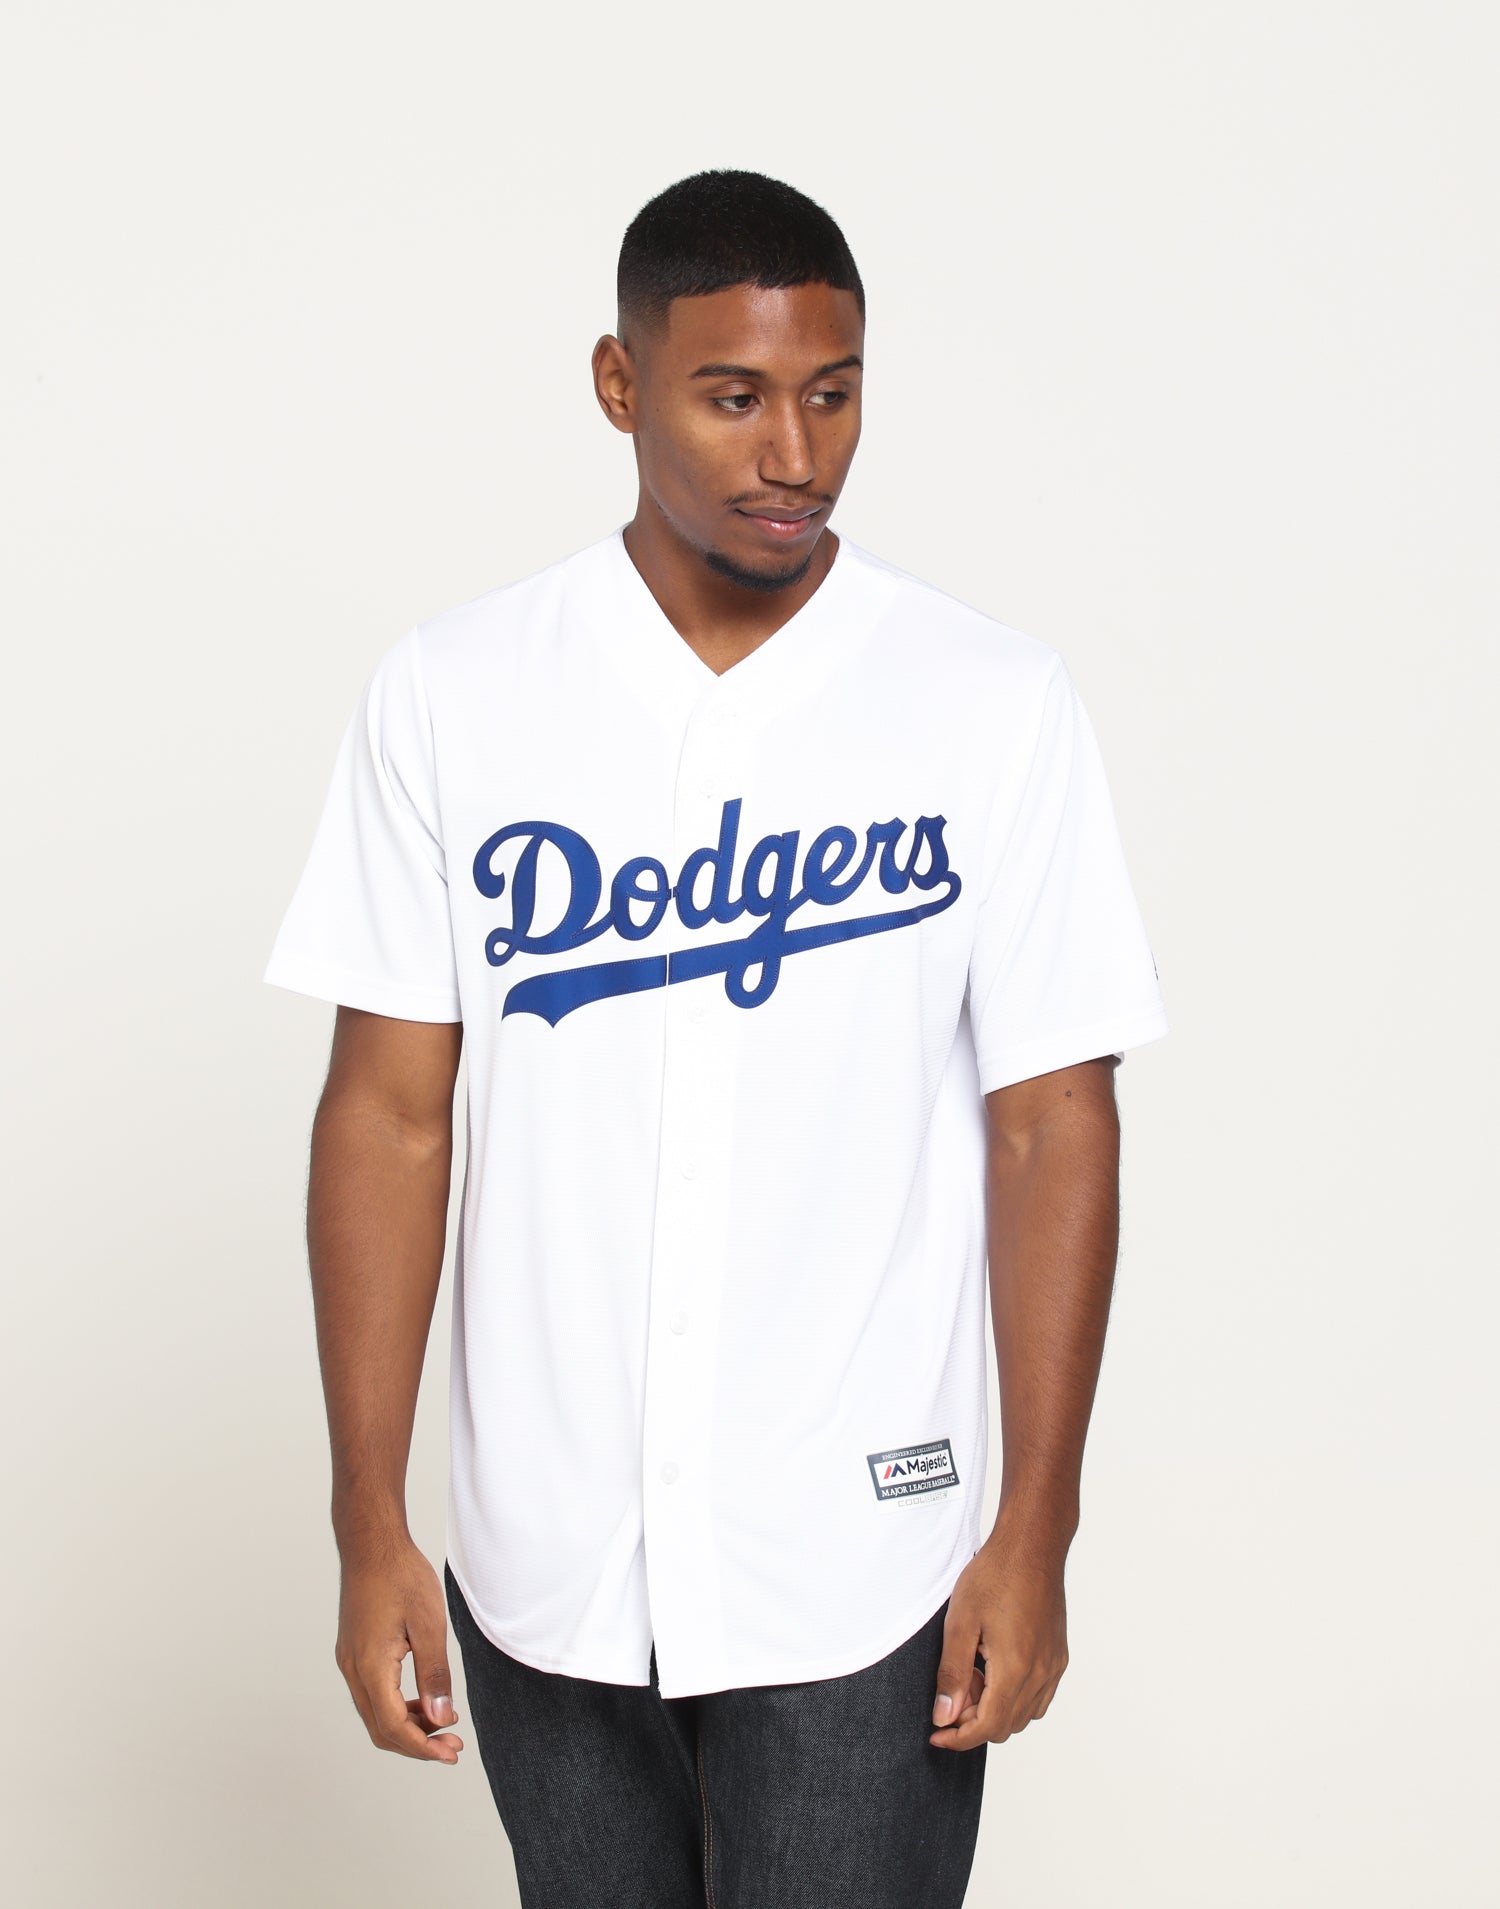 dodgers white jersey